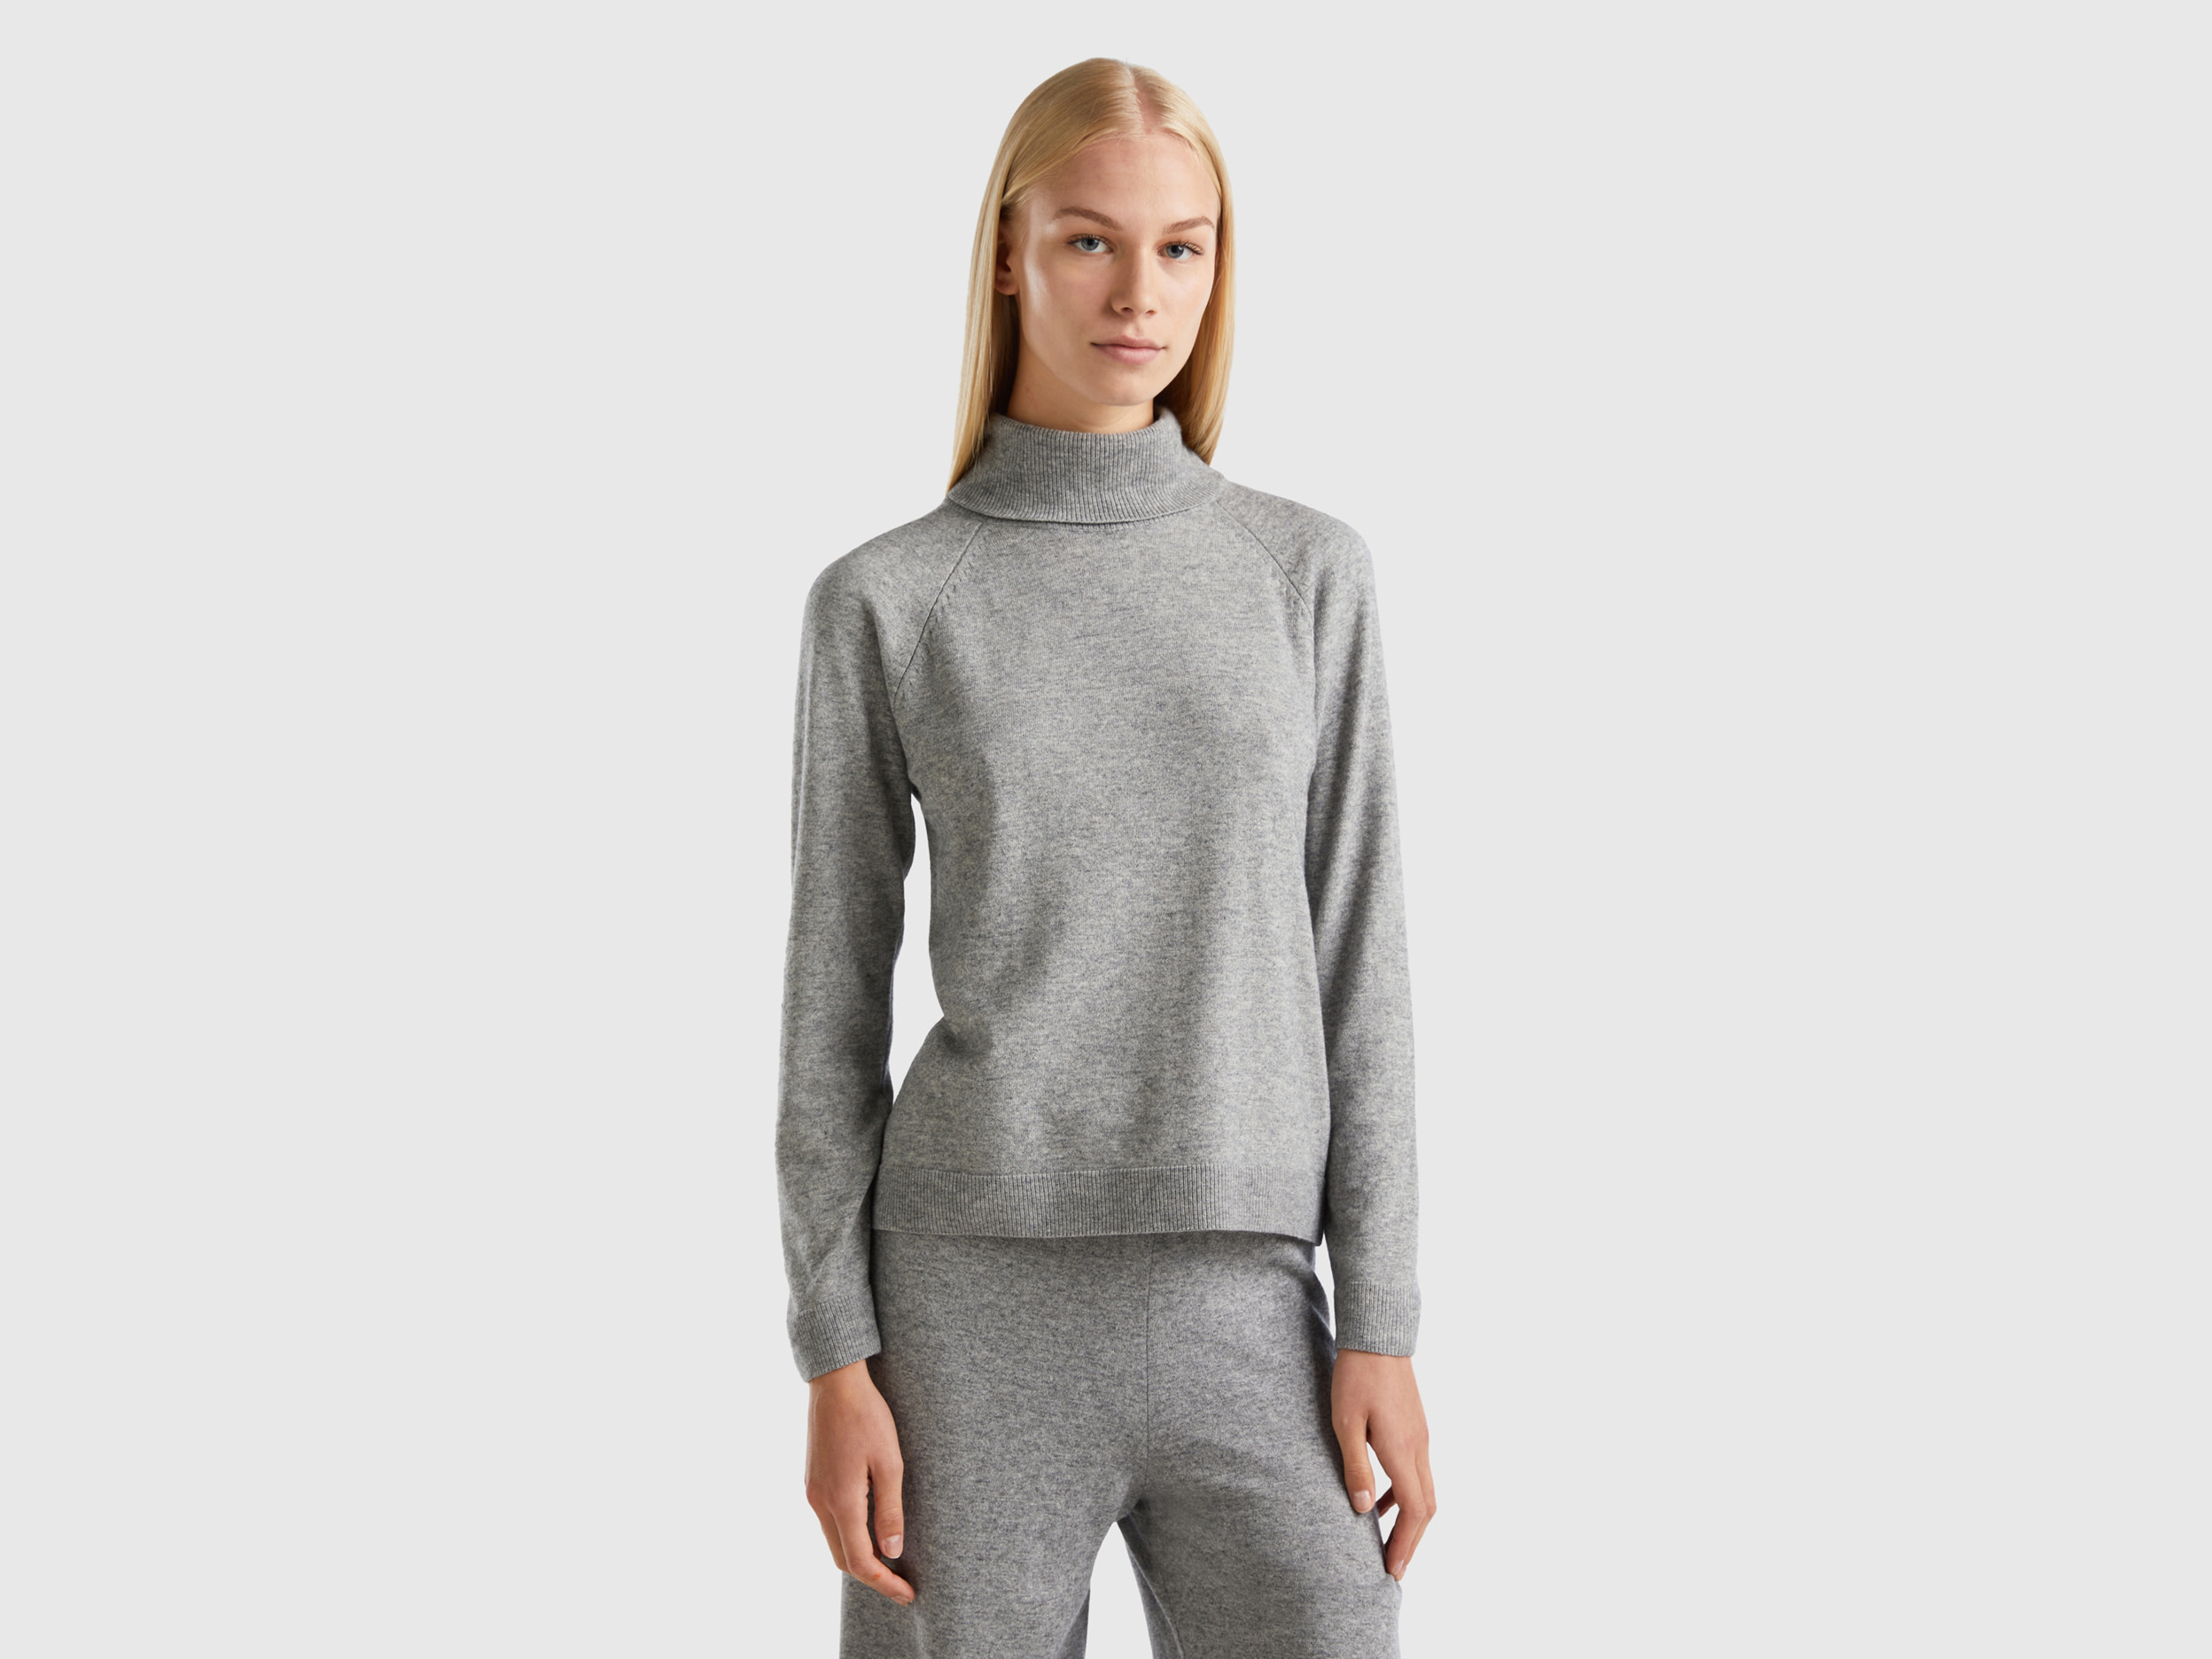 Benetton, Gray Turtleneck Sweater In Cashmere And Wool Blend, size L, Light Gray, Women